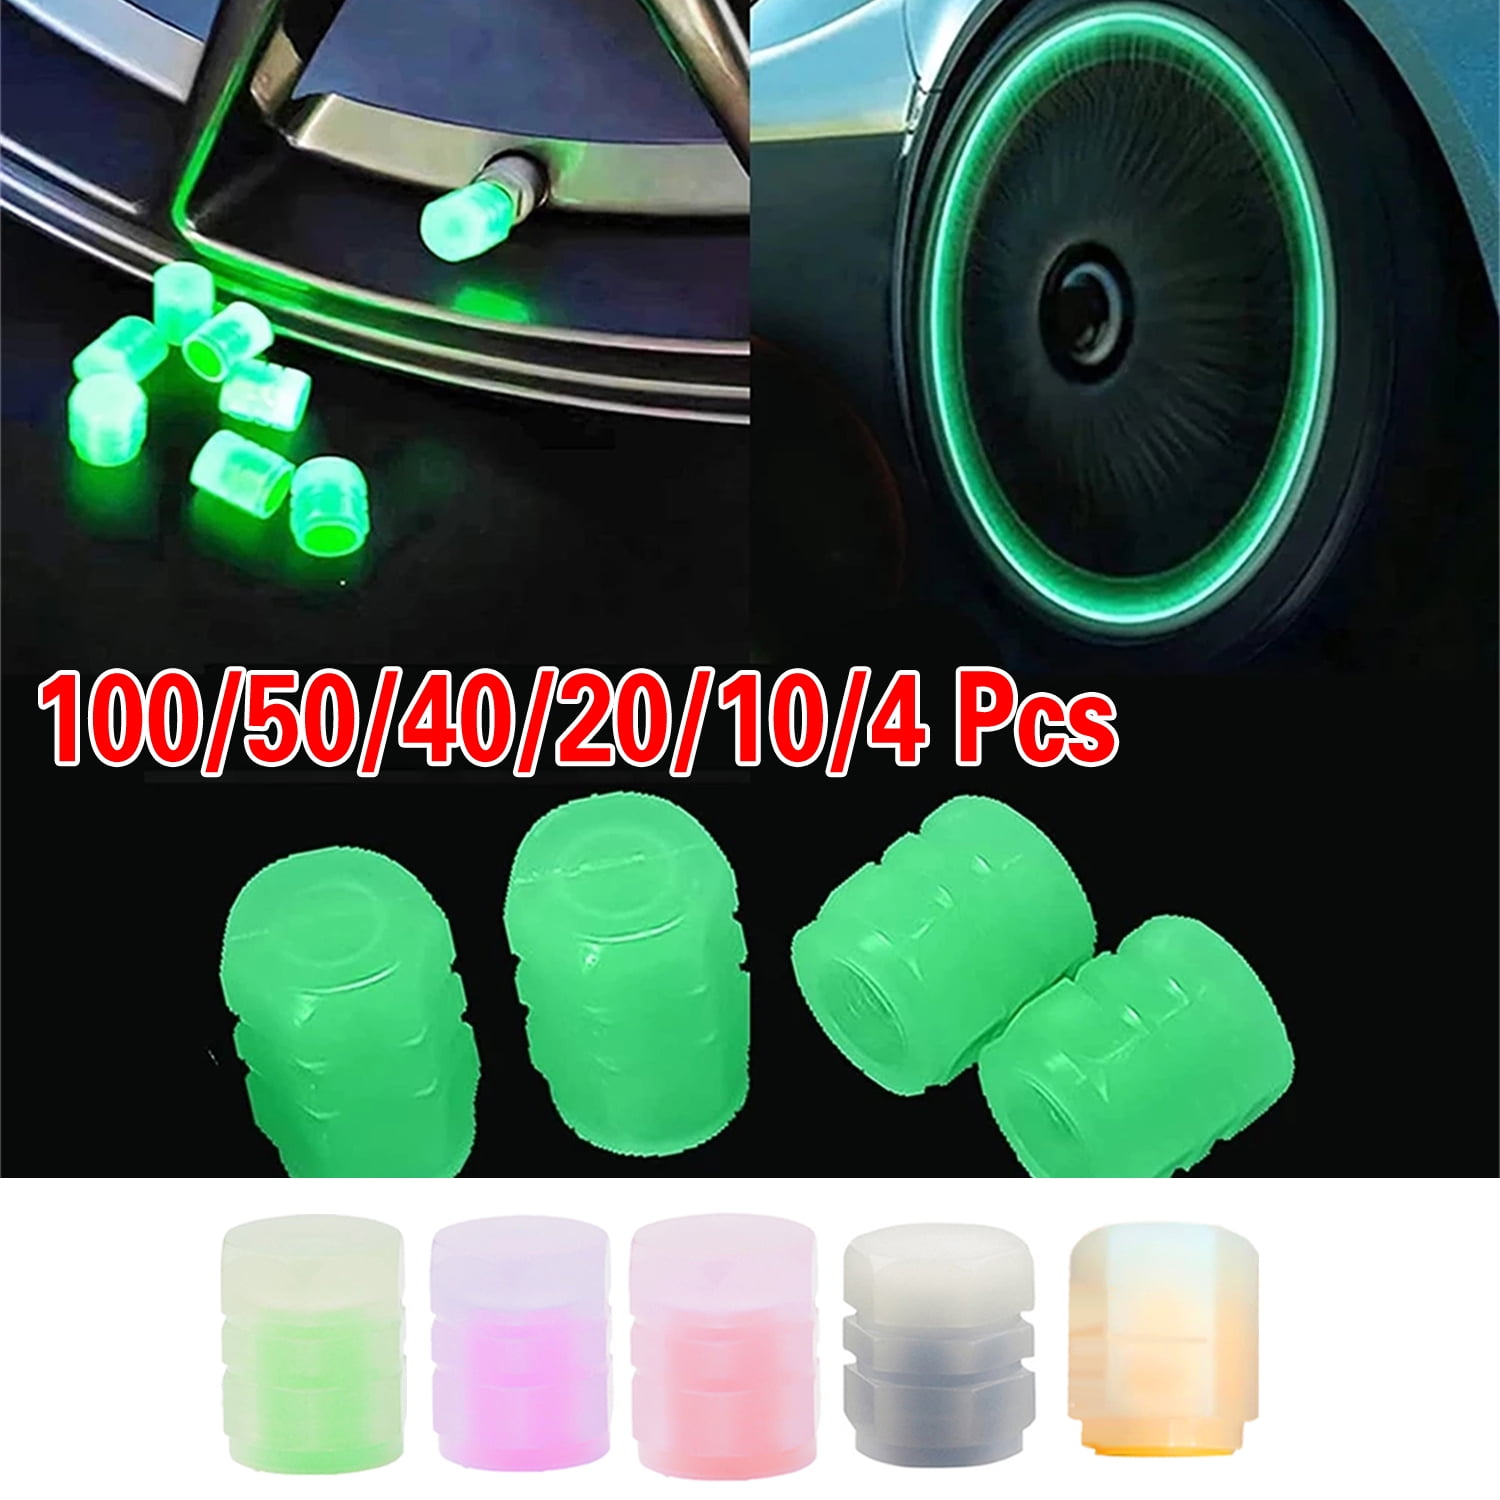 Universal Fluorescent Car Tire Valve Caps, Luminous Tire Valve Stem Covers  for Car Truck SUV Motorcycles Bike, Pieces, Red